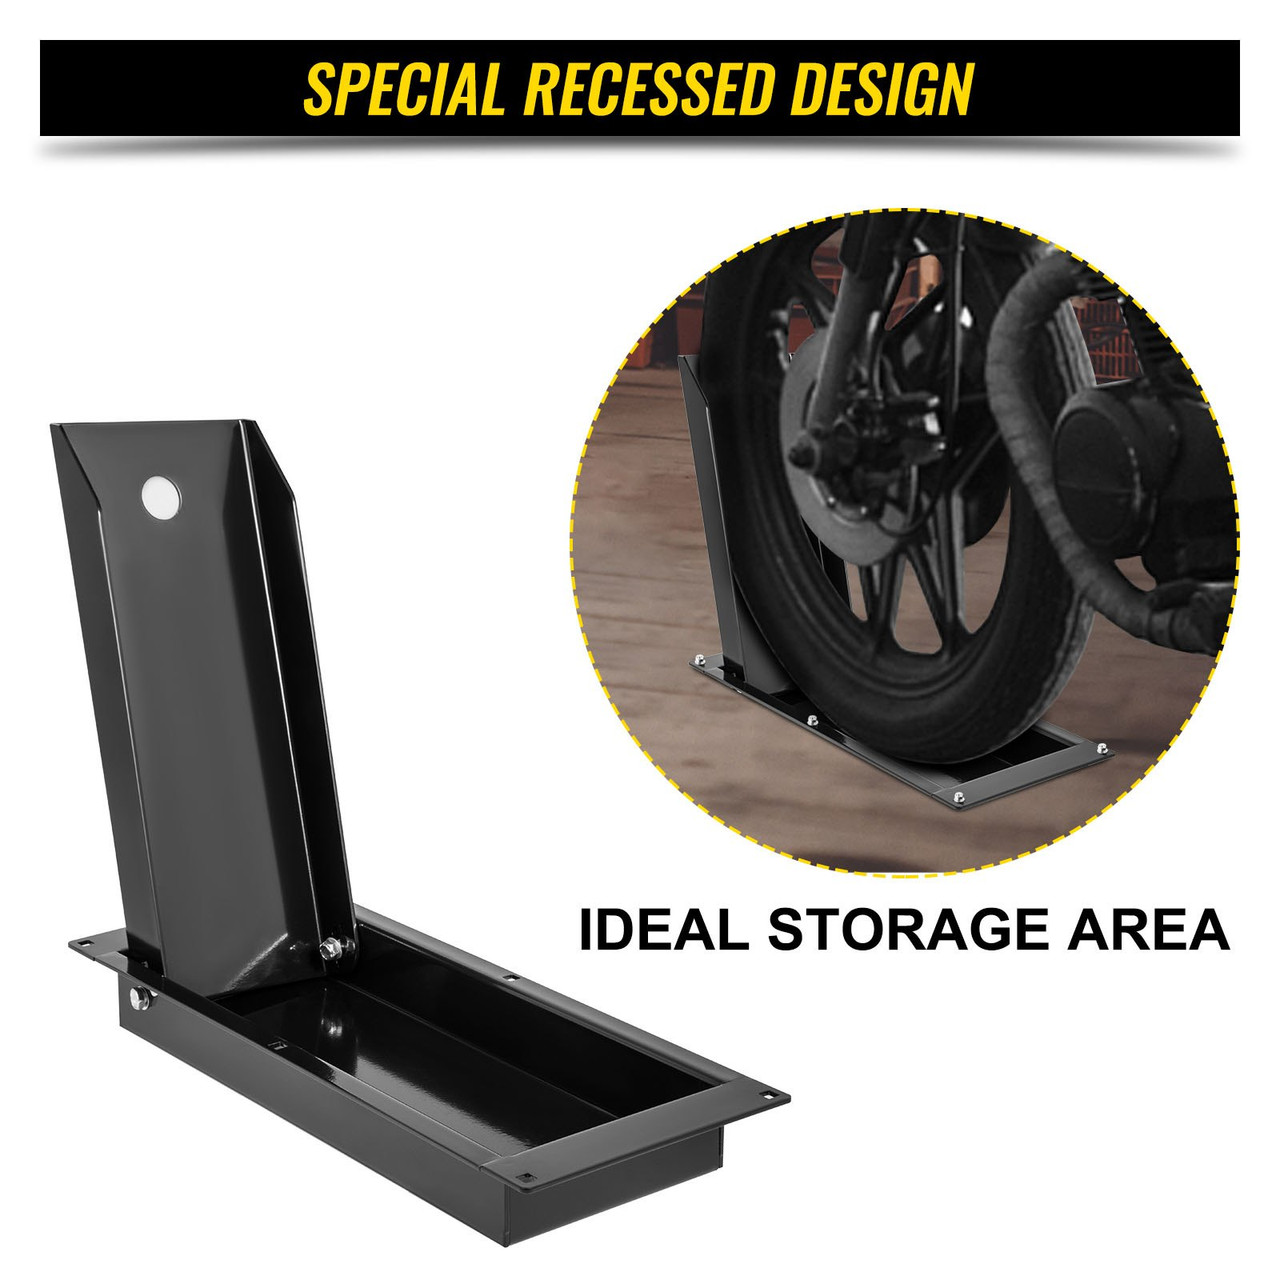 Recessed Wheel Chock, 1200 lbs Heavy Duty Wheel Stand, Black Motorbike Front Chock for 16" Wheels, High-Grade Steel Trailer Stand, with Space-Saving Design & Pre-Drilled Holes (Small-16 Inch)